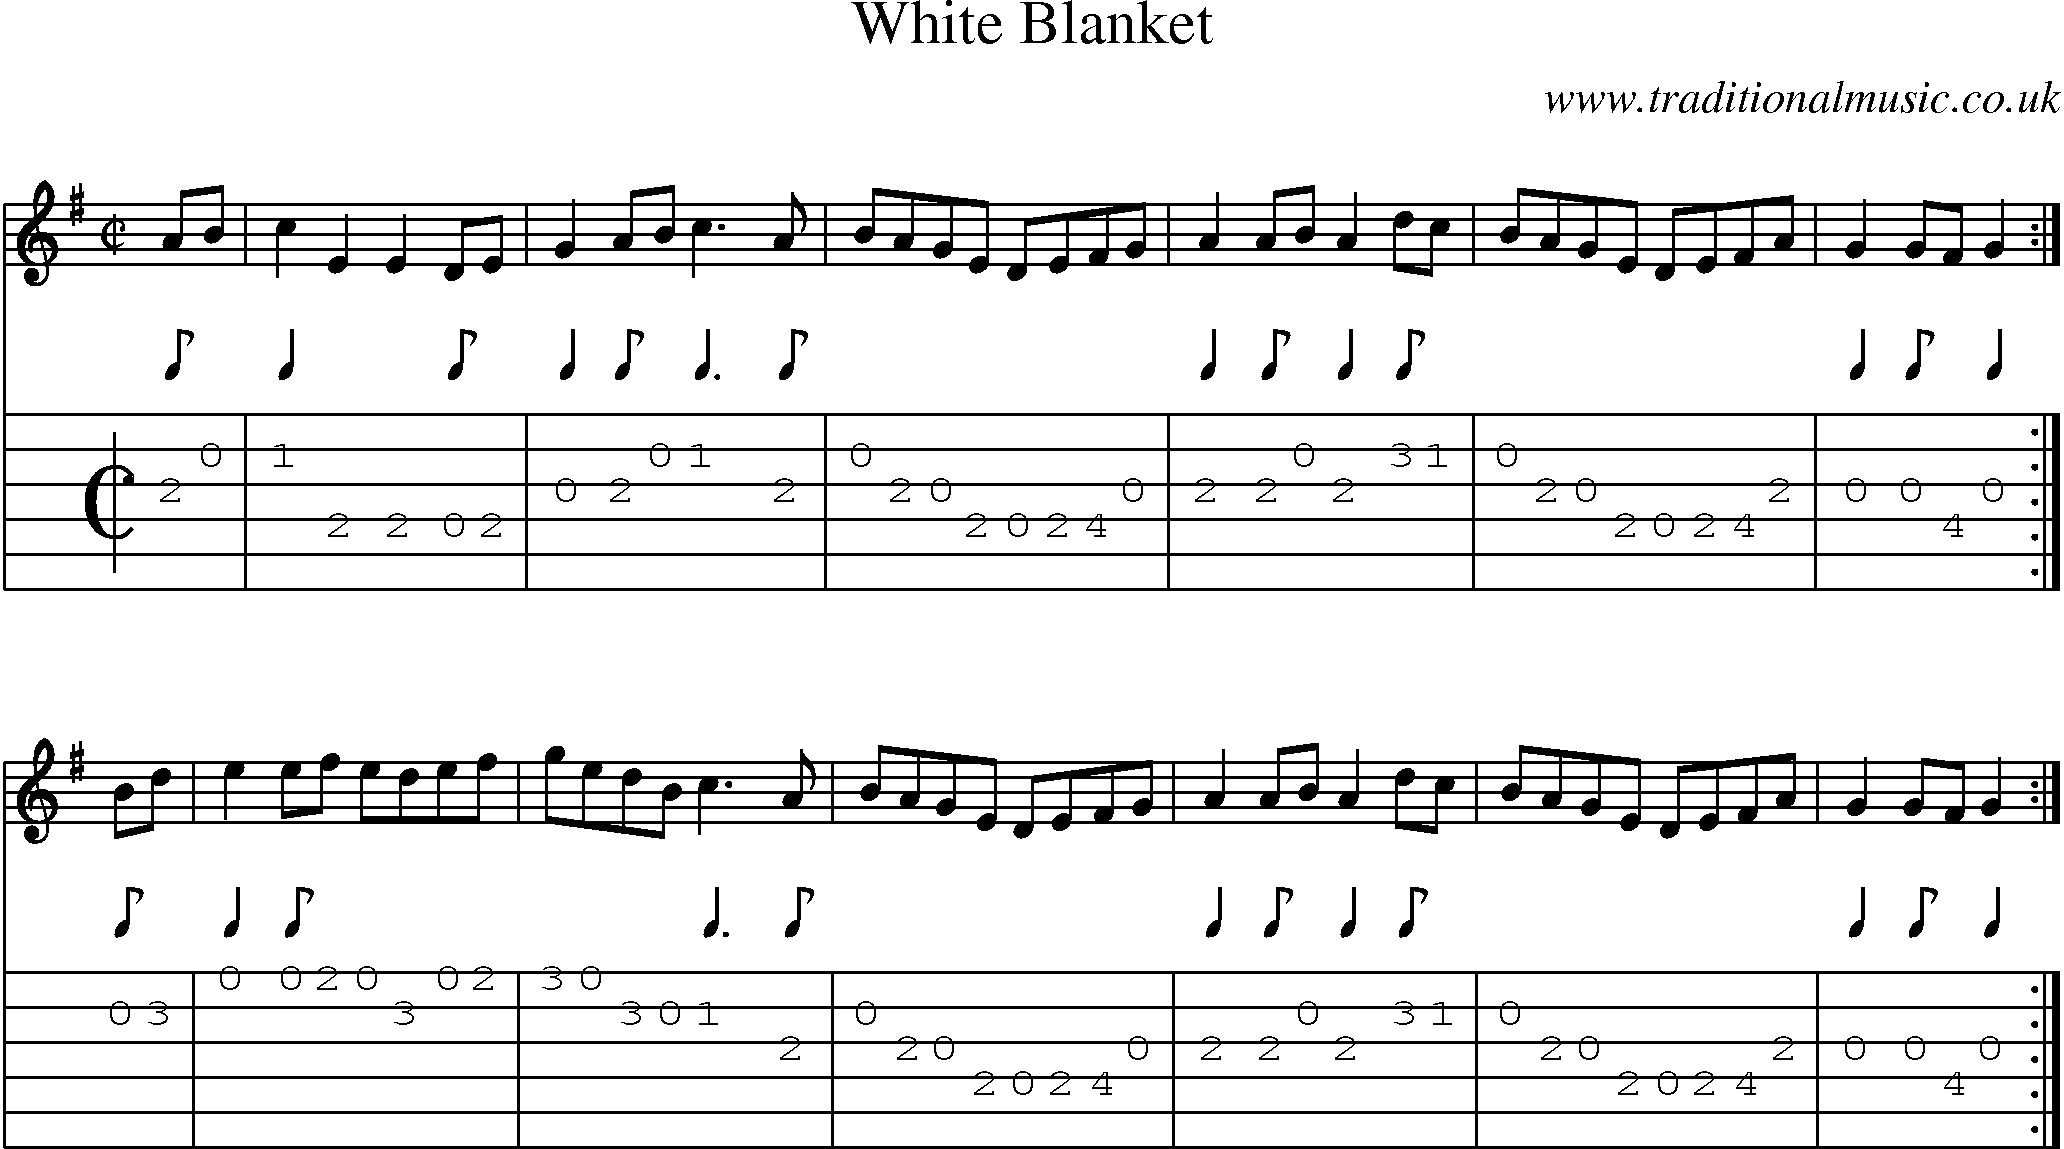 Music Score and Guitar Tabs for White Blanket